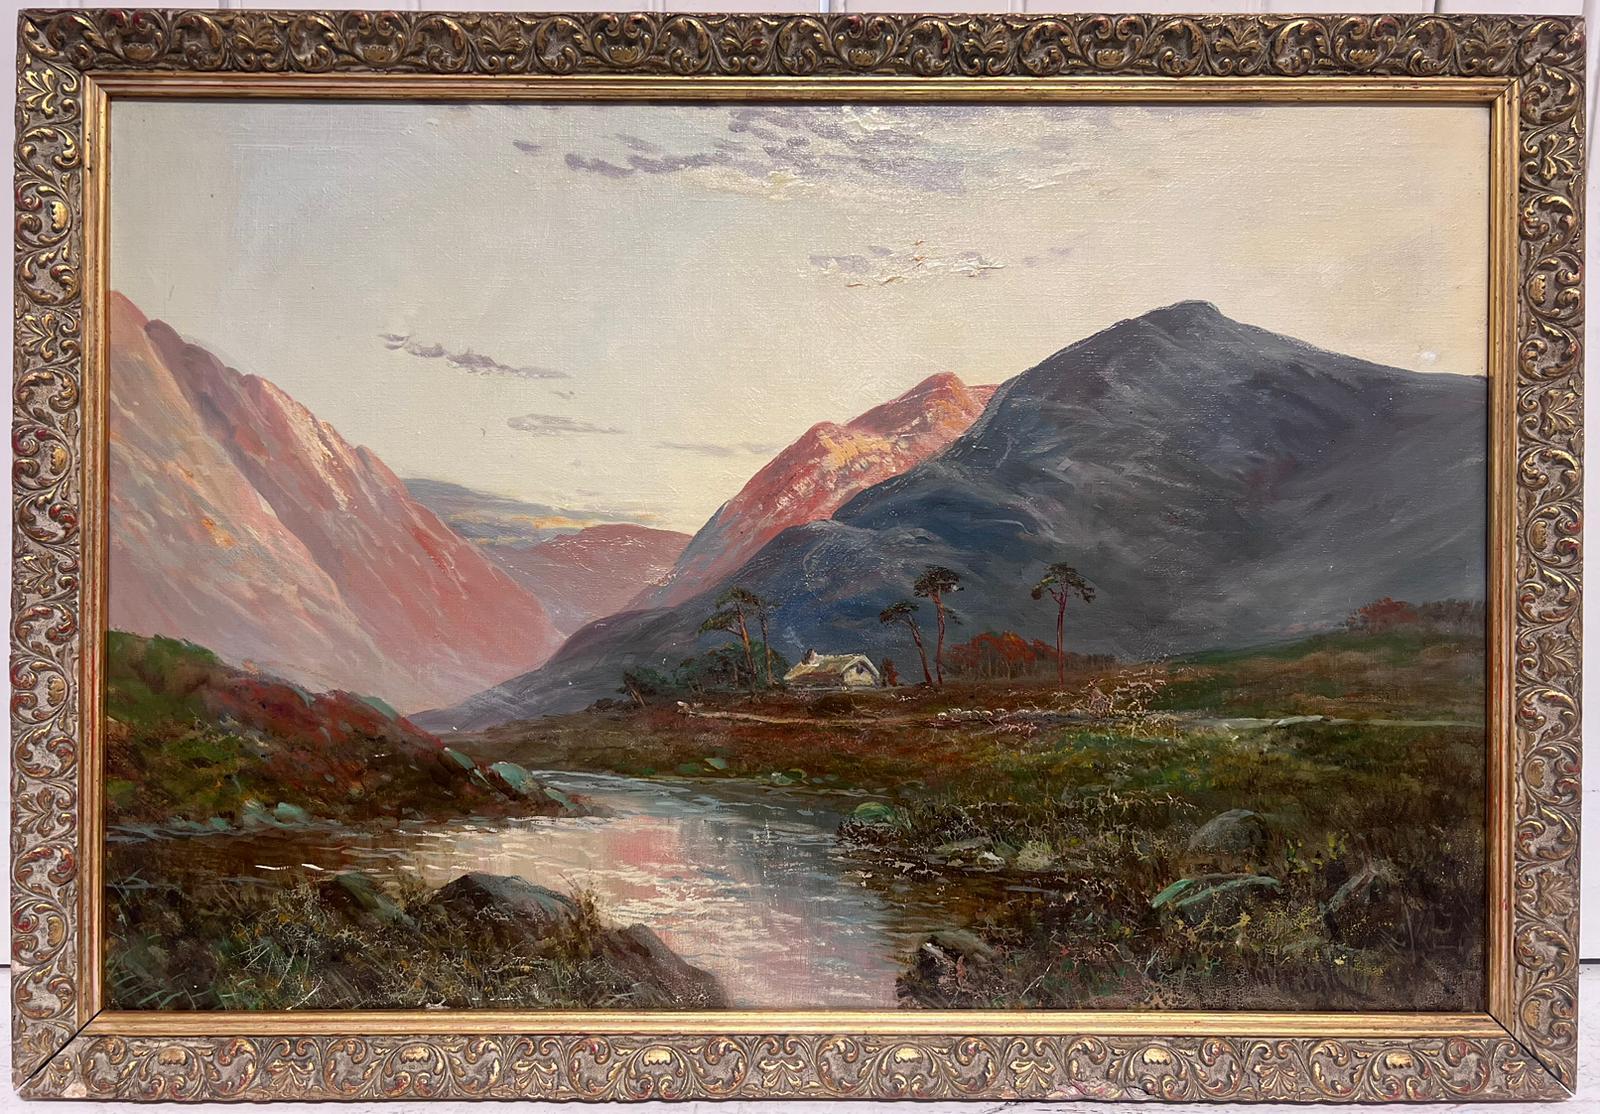 The Highland Glen
signed by F. E. Jamieson (British 1895-1950)
oil painting on canvas, framed
framed: 18 x 26 inches
canvas : 16 x 24 inches
provenance: private collection, UK
condition: very good and sound condition 
